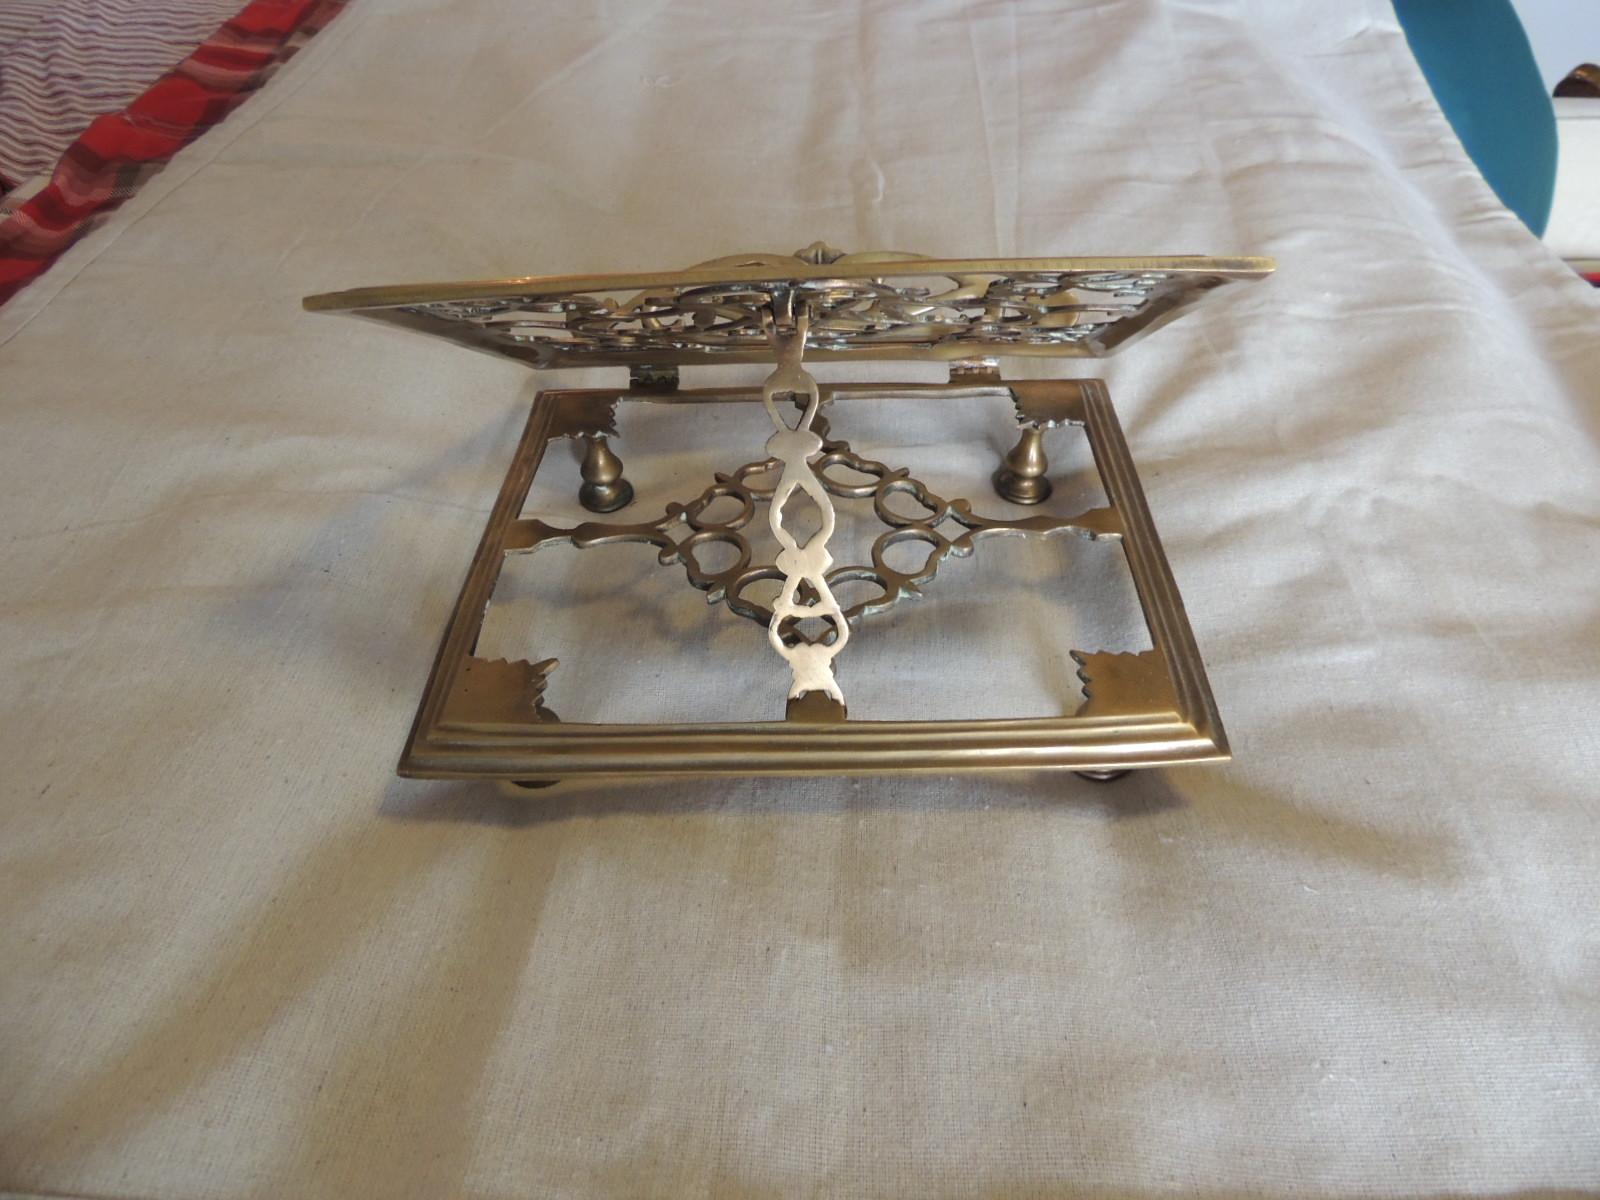 Hand-Crafted Vintage Brass Ornate Book or Bible Stand with Small Round Feet